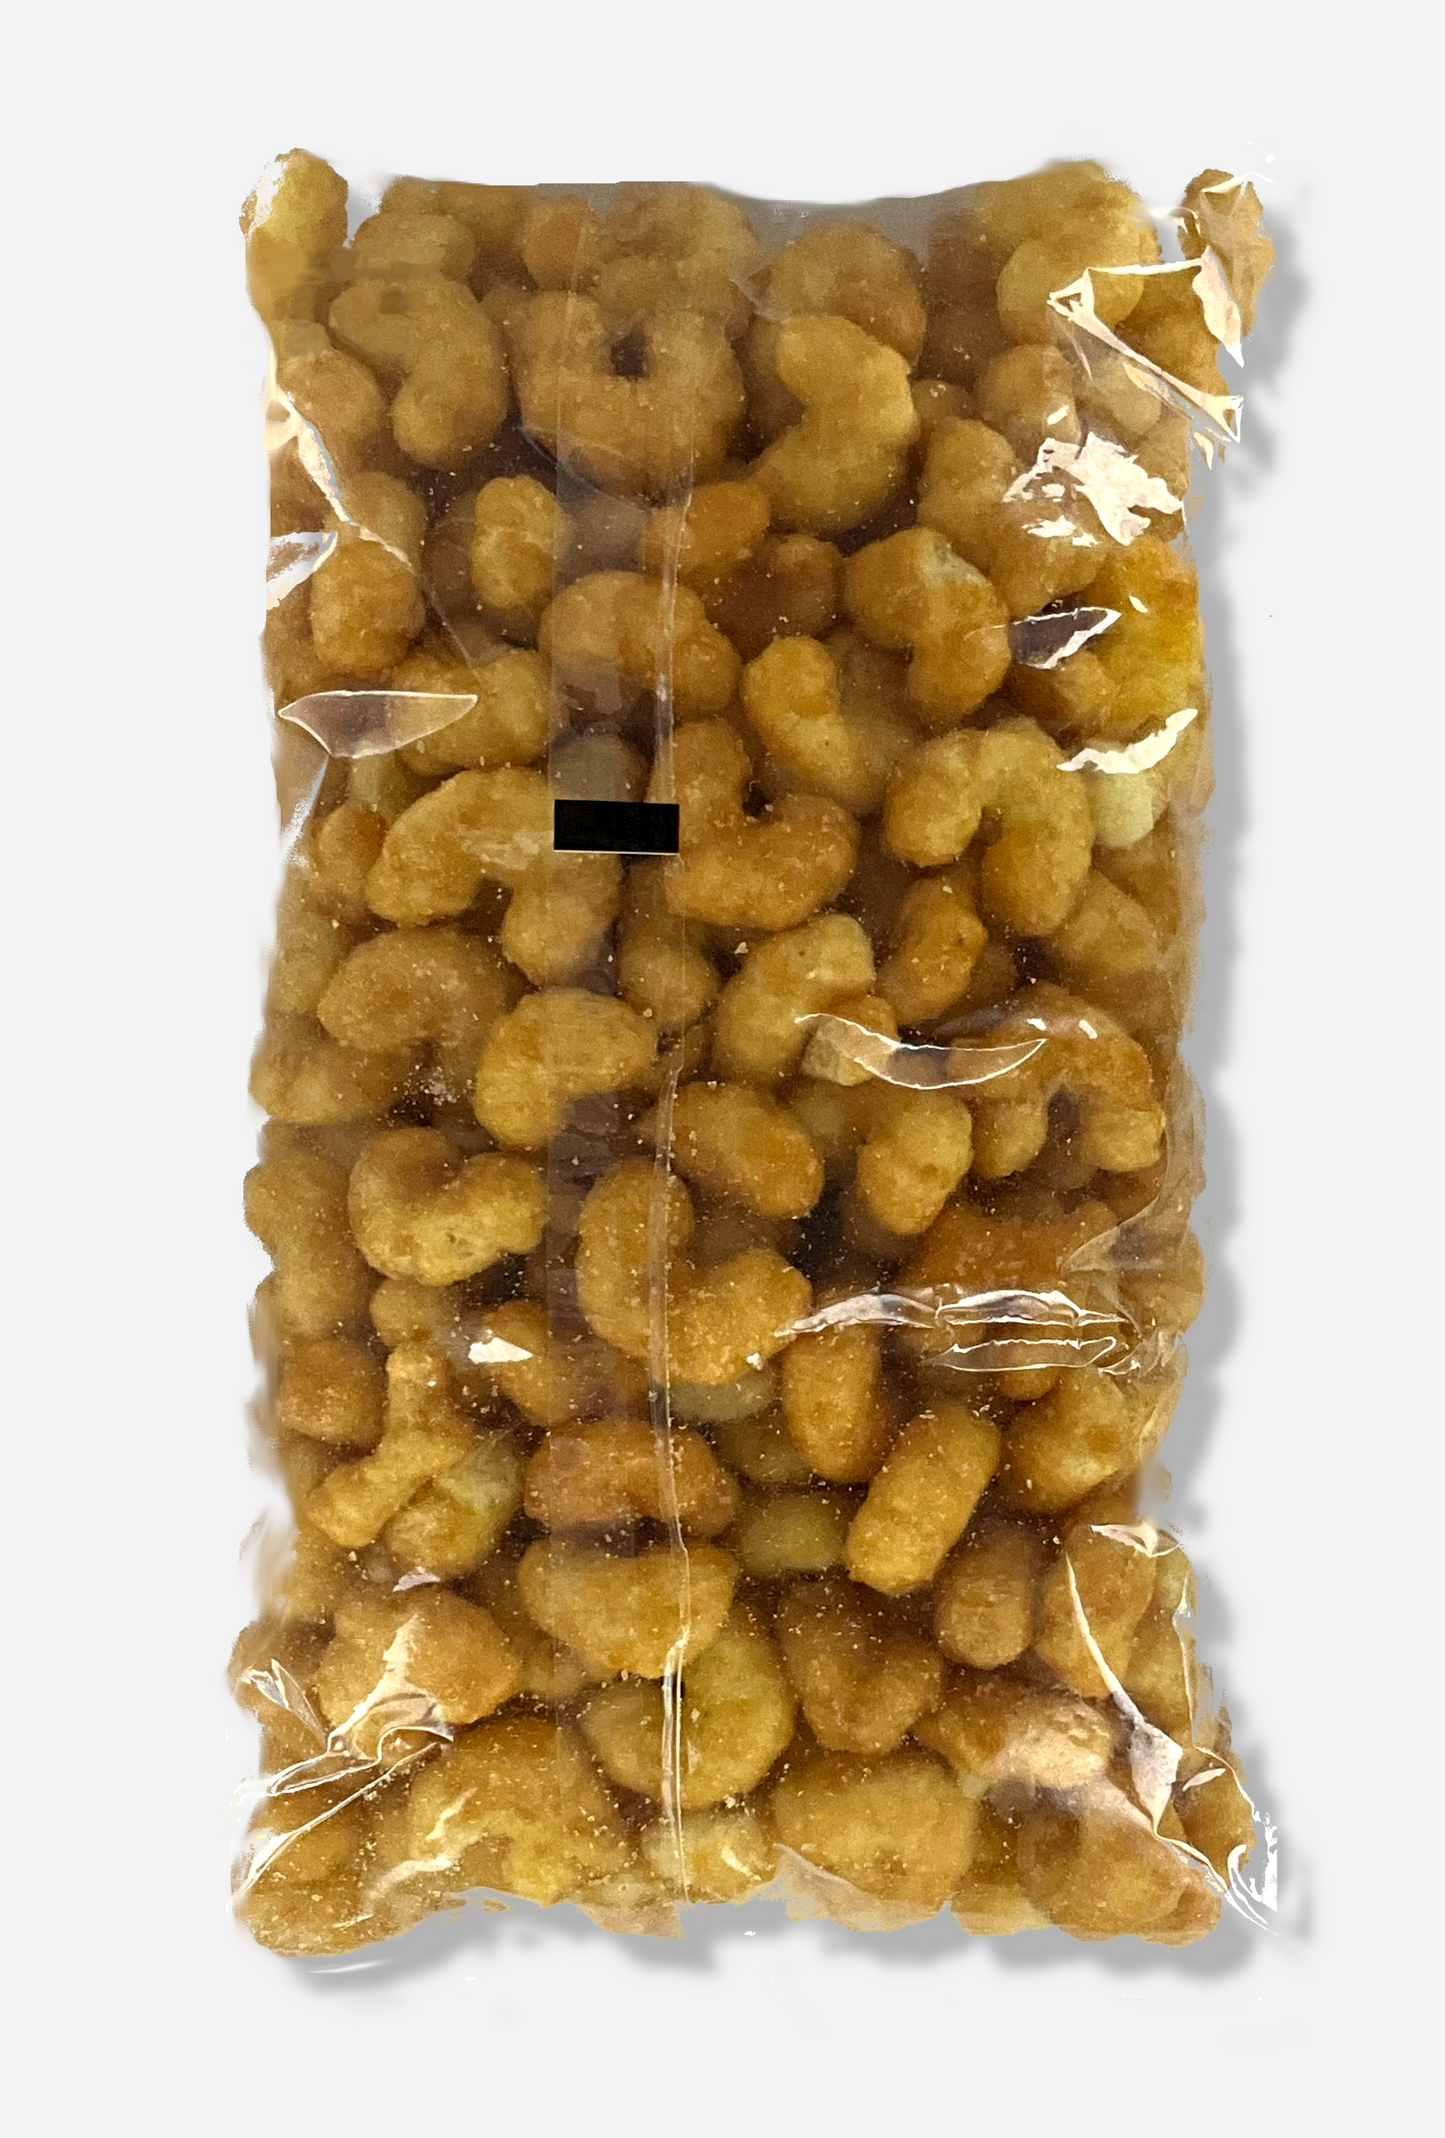 A picture of the back of a clear plastic bag of Buc-ee's Beaver Nuggets, which are puffed corn snack with caramel flavors.